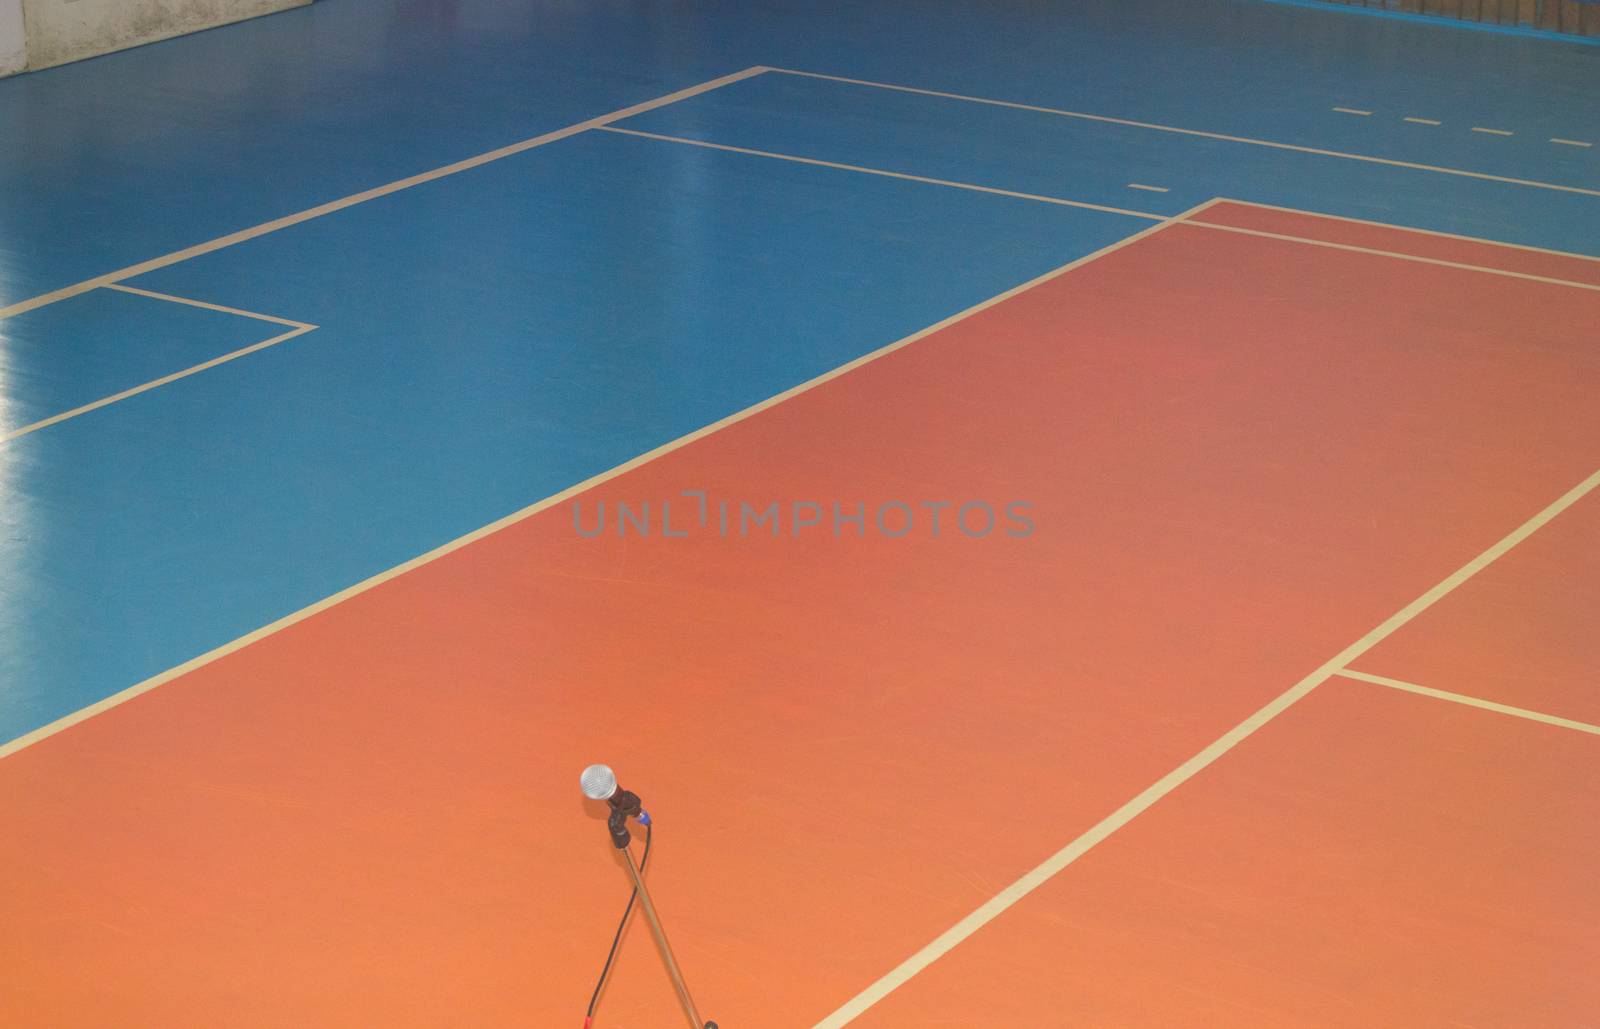 Empty sports training room with markings on the floor for competitions.